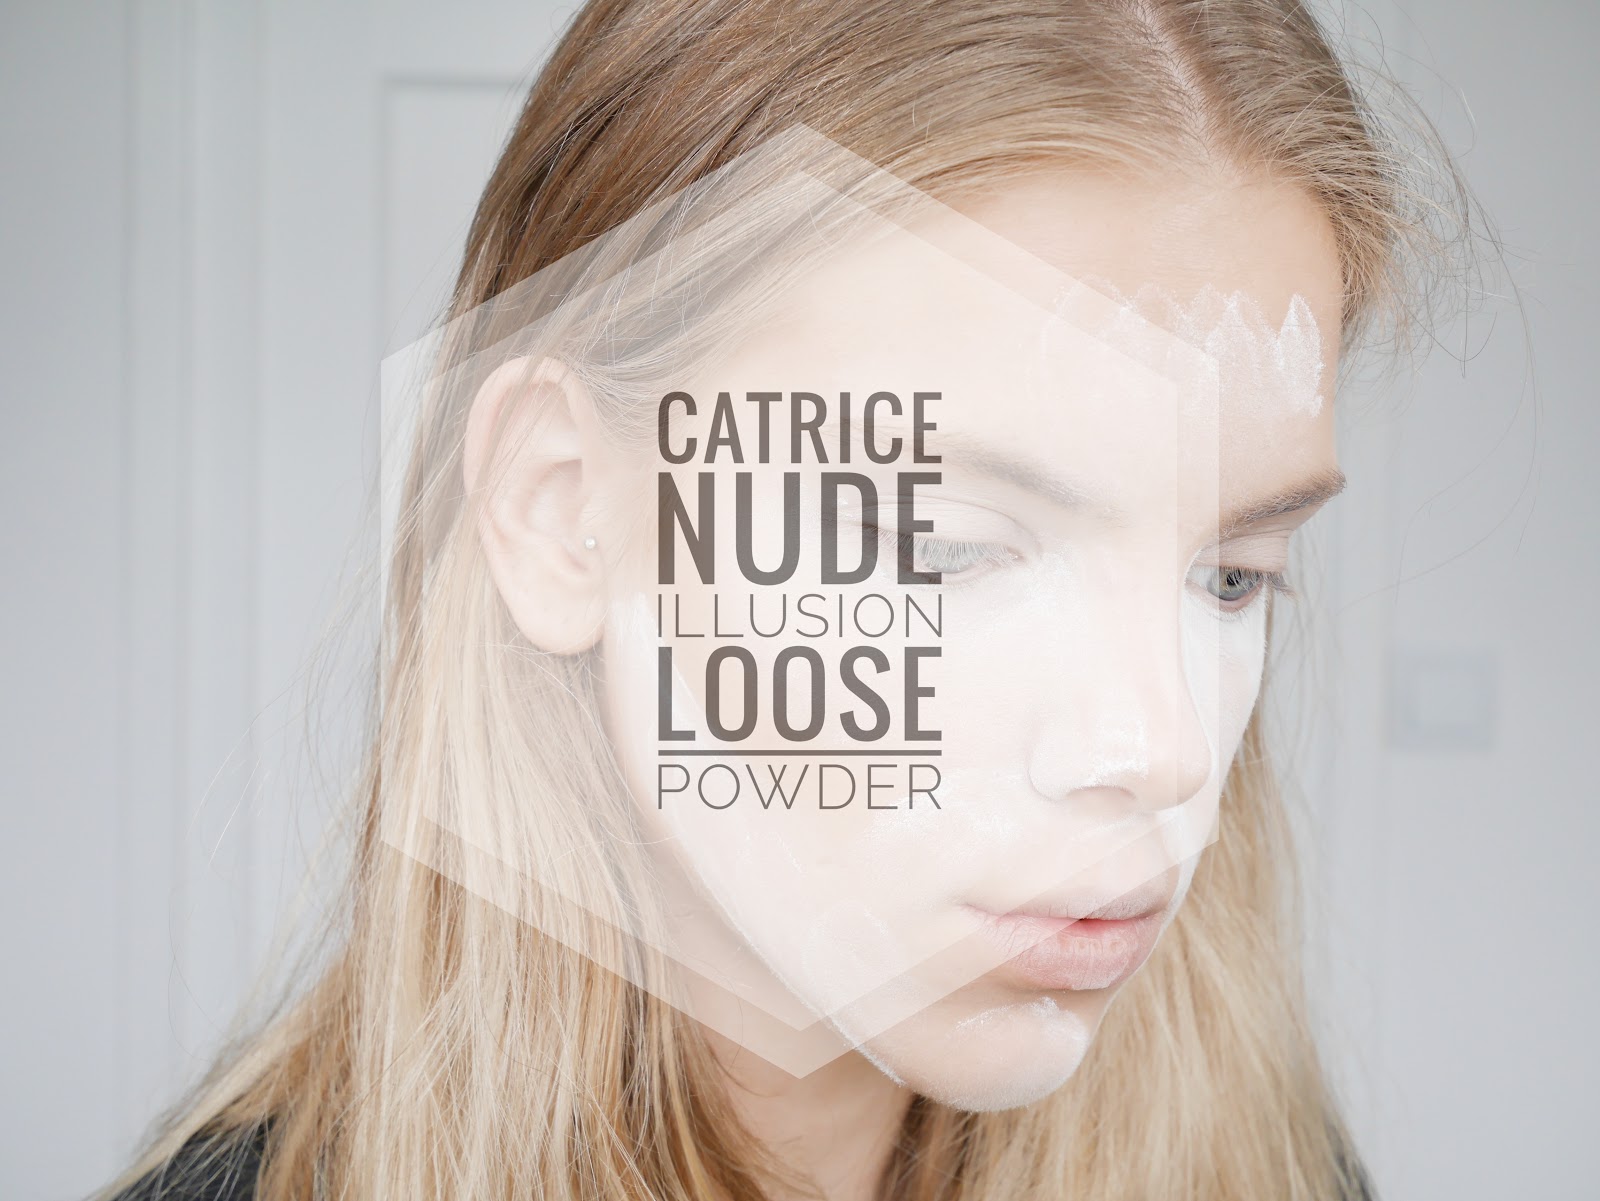 A worldwide best- seller: Catrice Nude Illusion Loose 